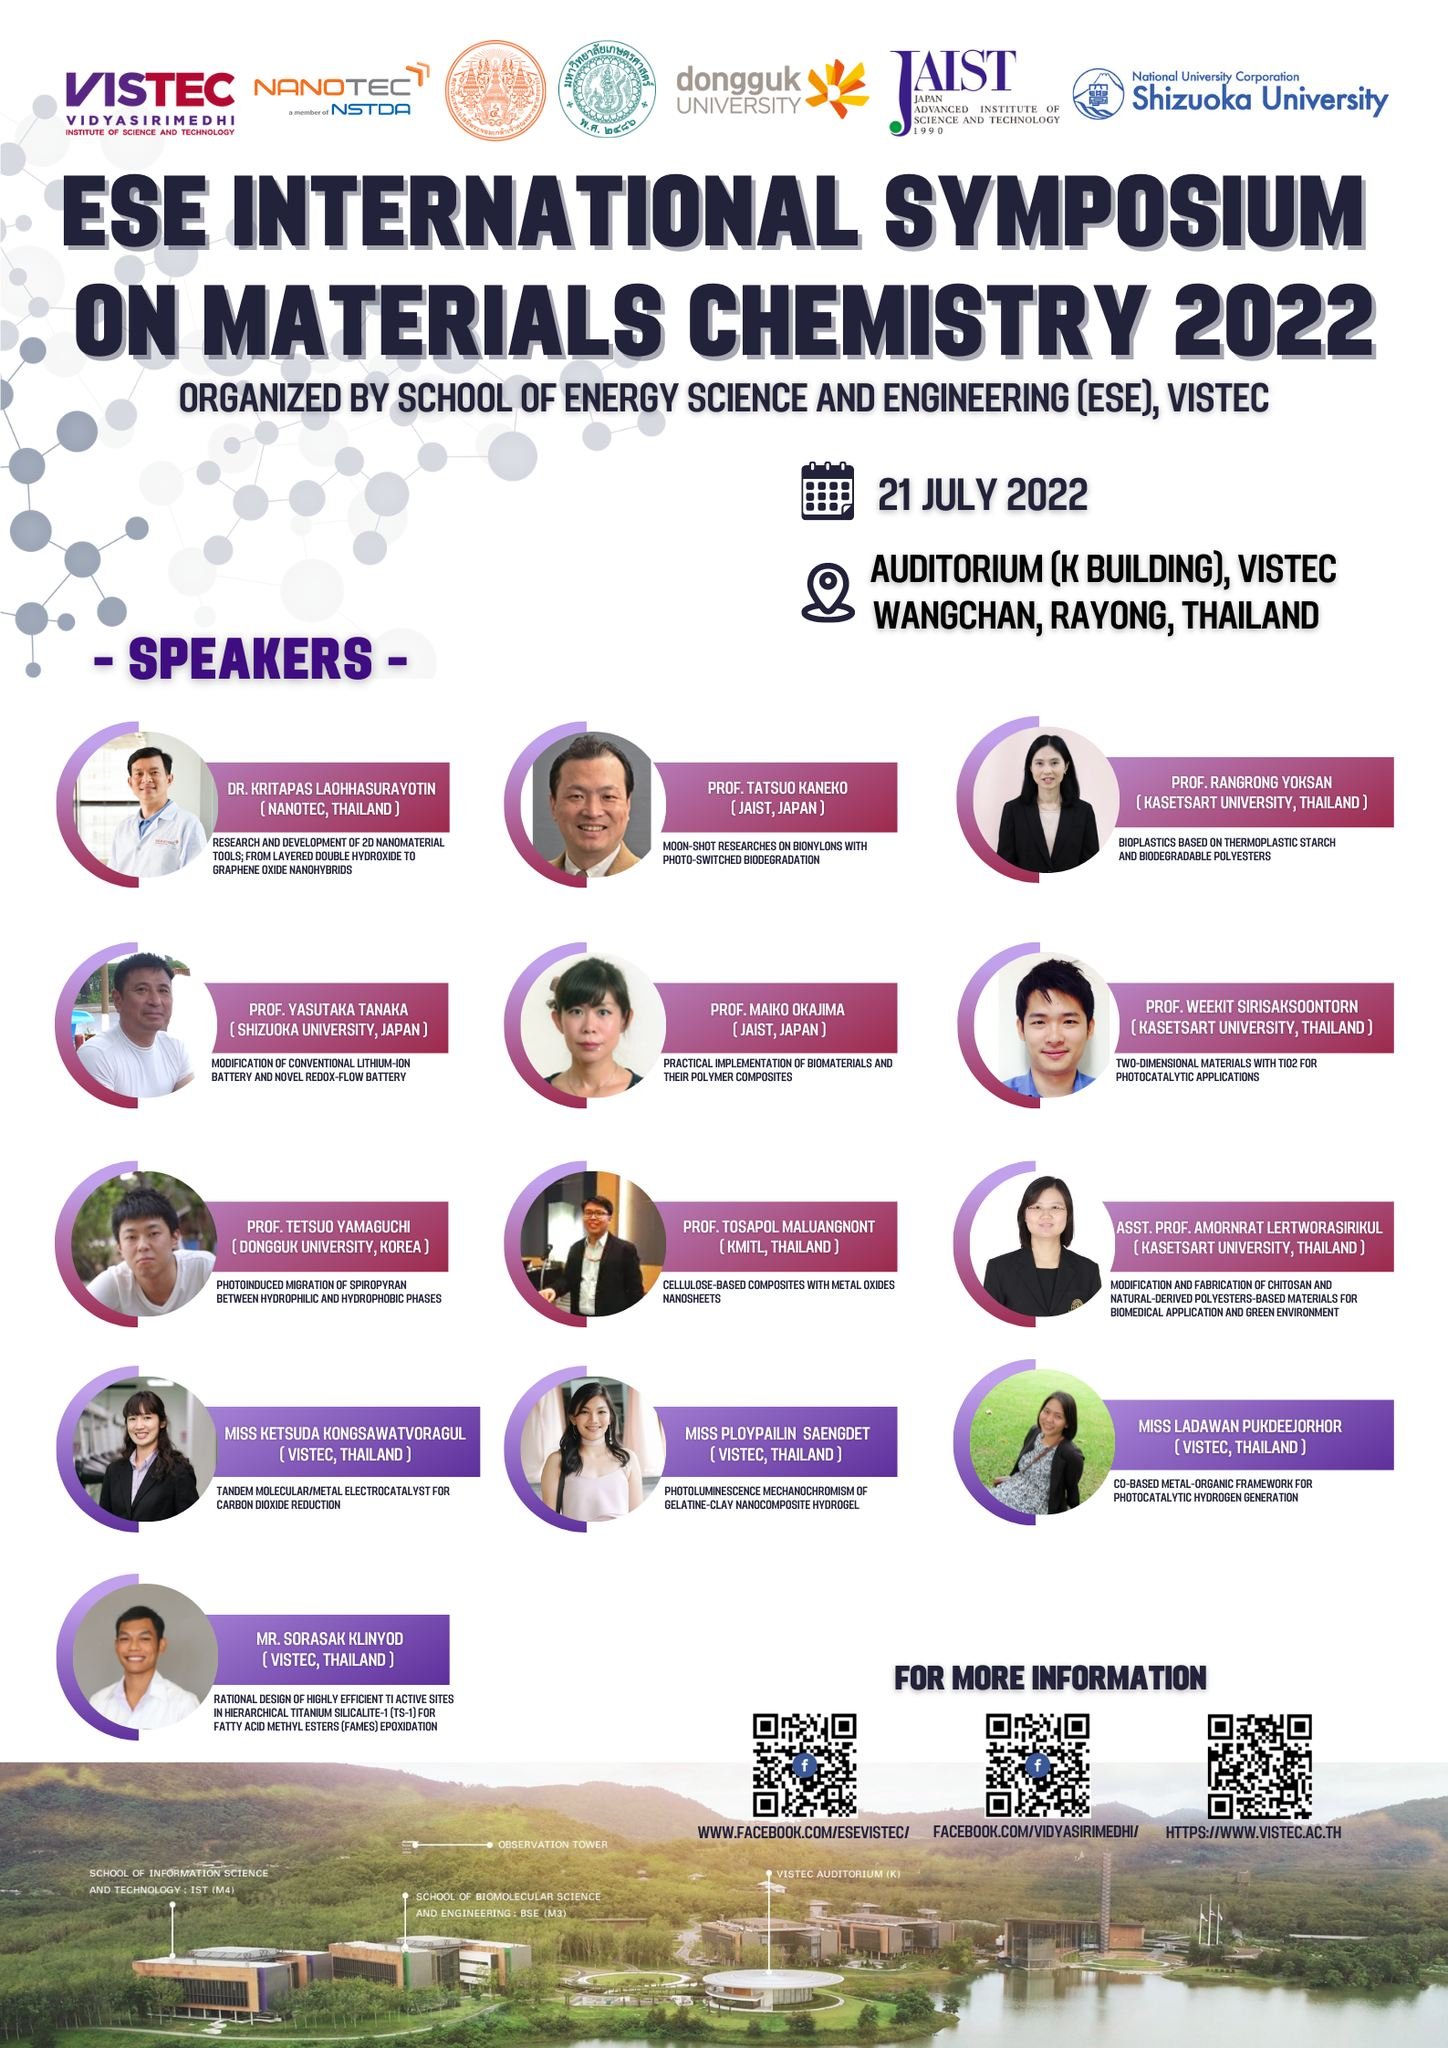 On July 21, 2022, ESE will hold "ESE symposium on materials chemistry 2022" 